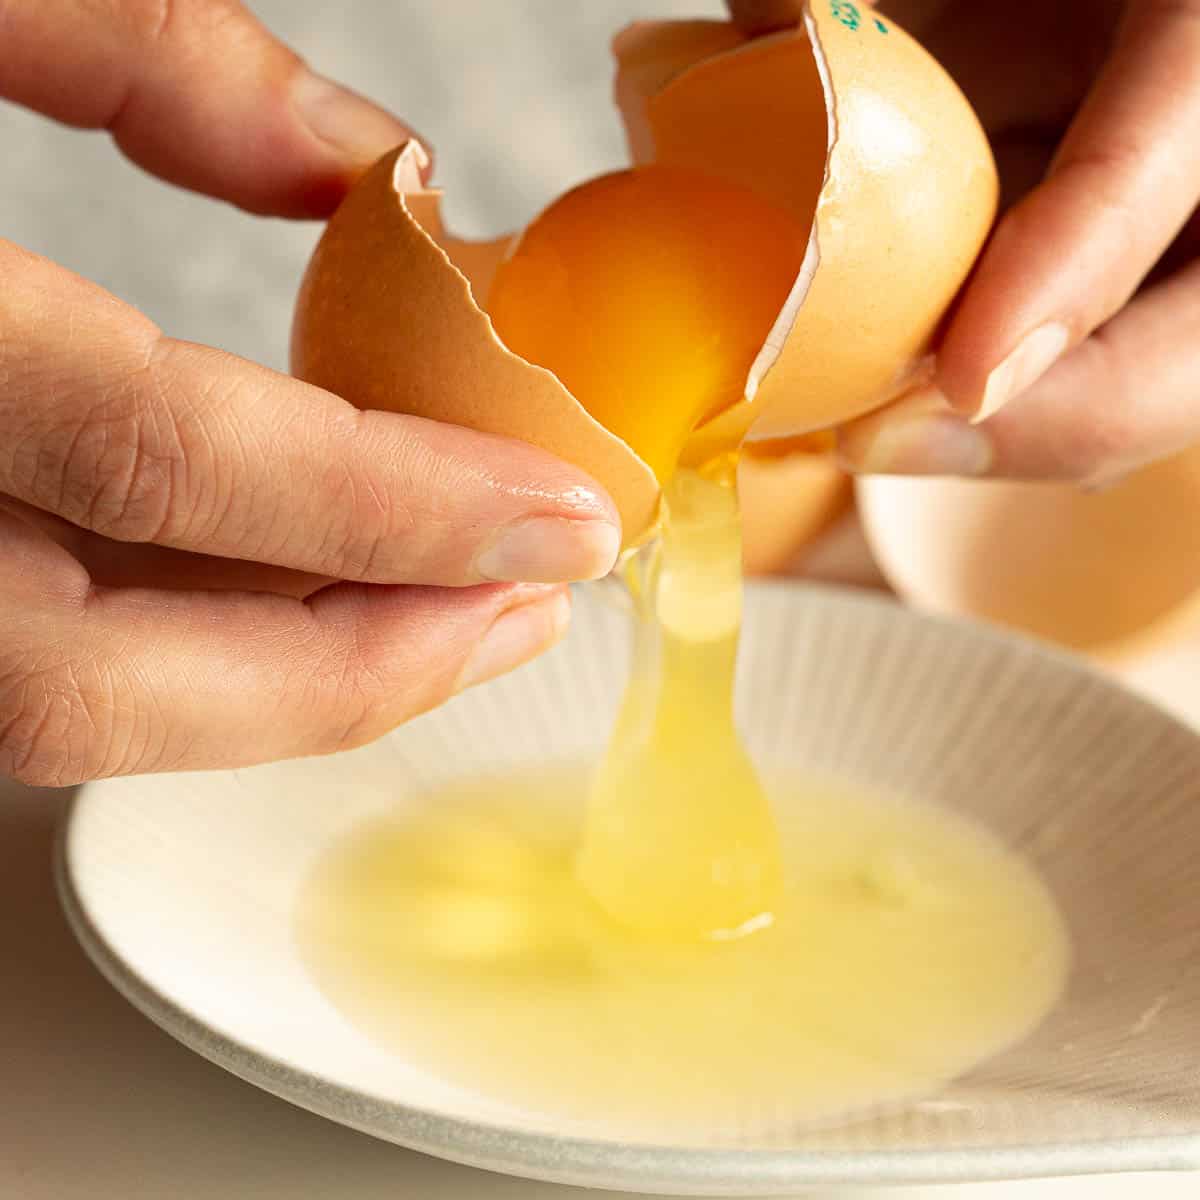 The yolk is being split from the egg white using the shell.